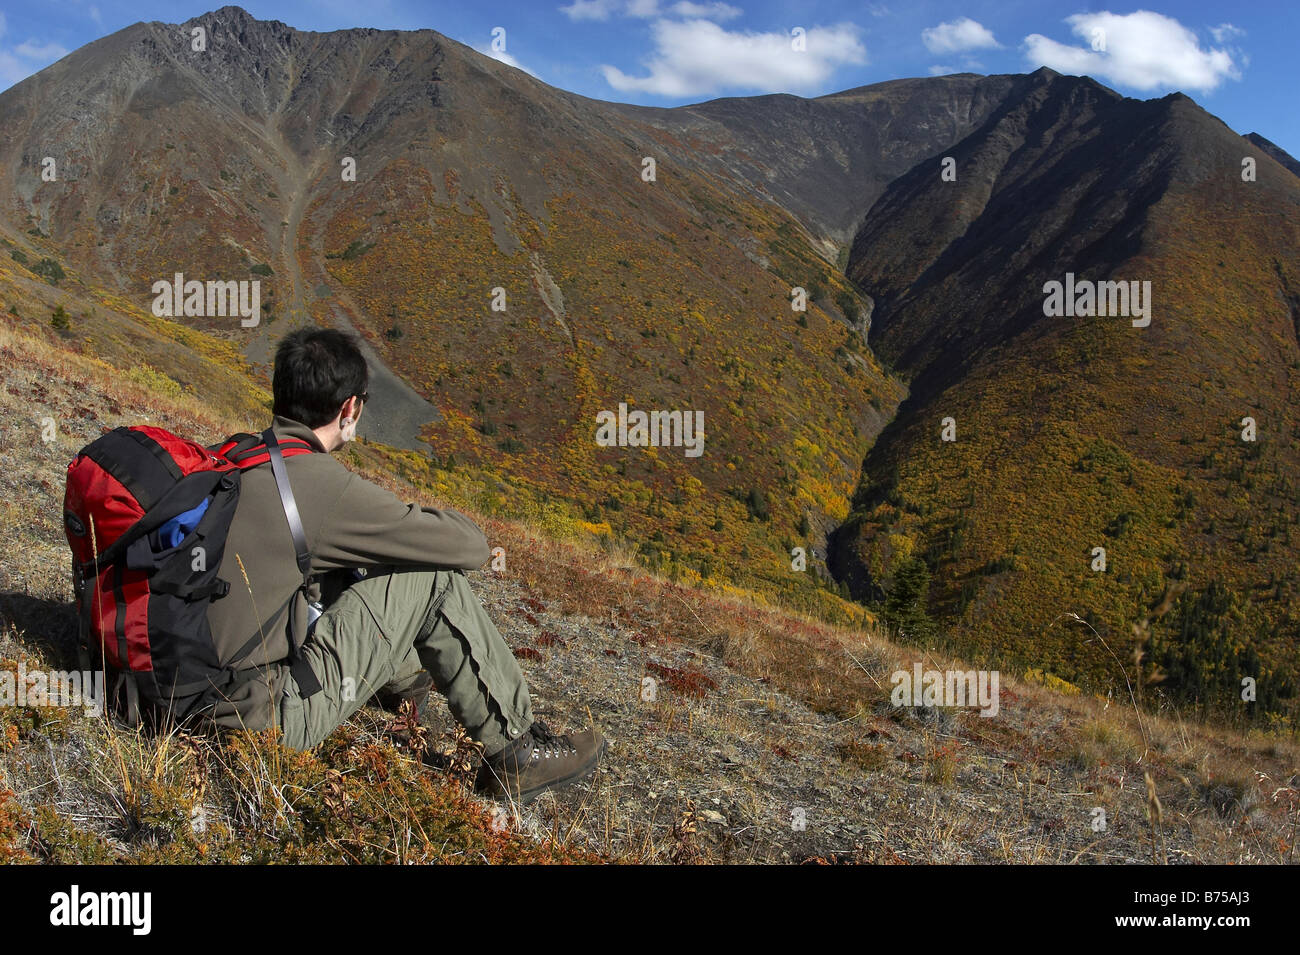 Hiker resting in the Whitehorse area, Caribou Mountain, near Carcross, Yukon, Canada Stock Photo